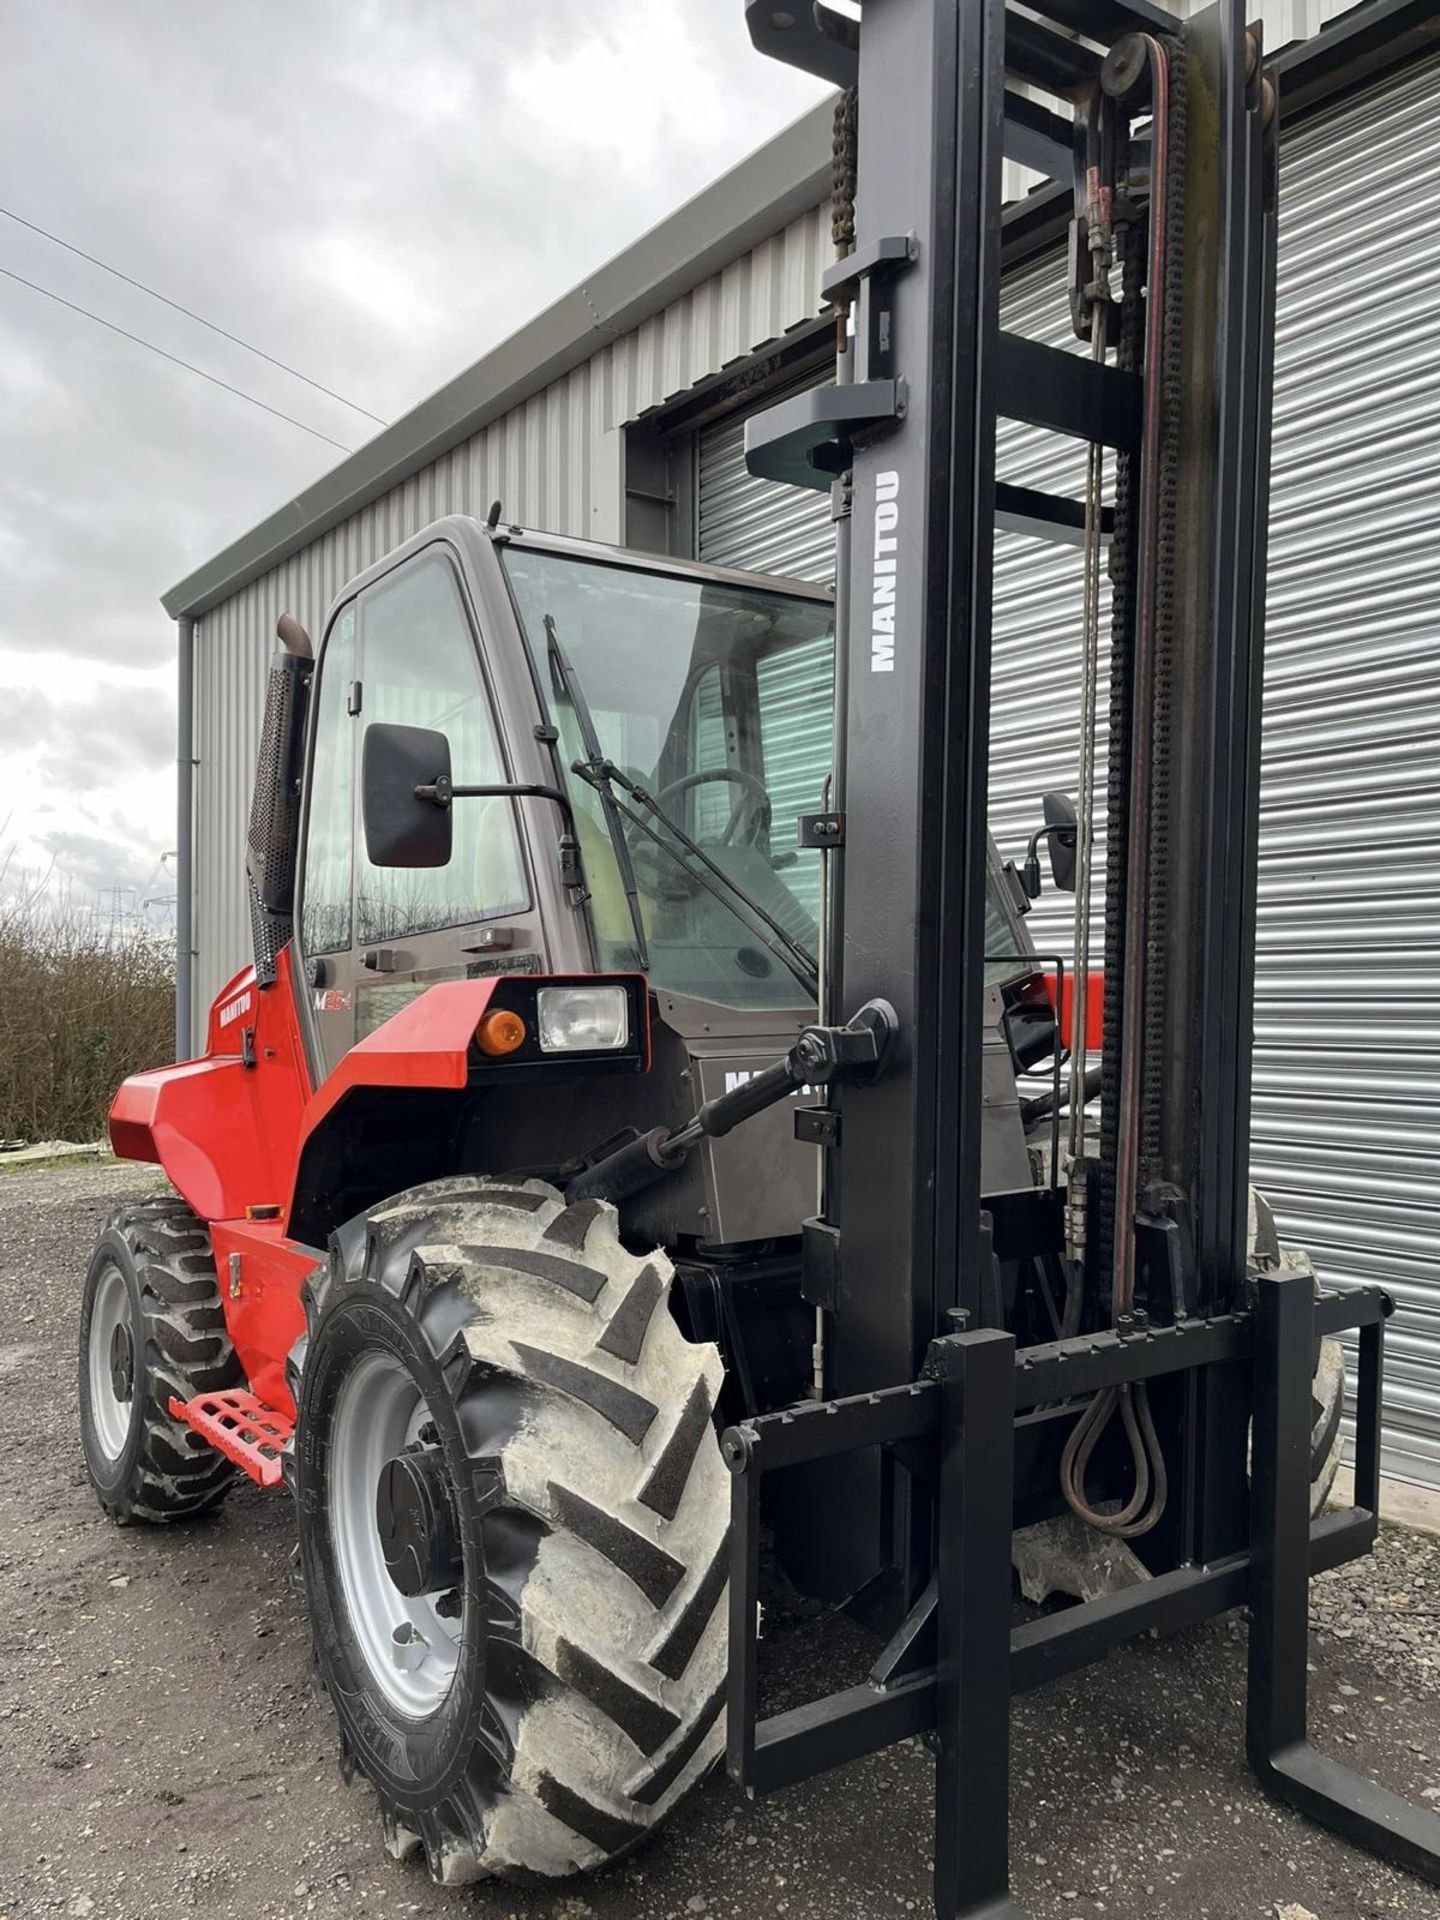 2017, MANITOU - M26, 2.6 Tonne (4WD) Forklift Truck - Image 2 of 6